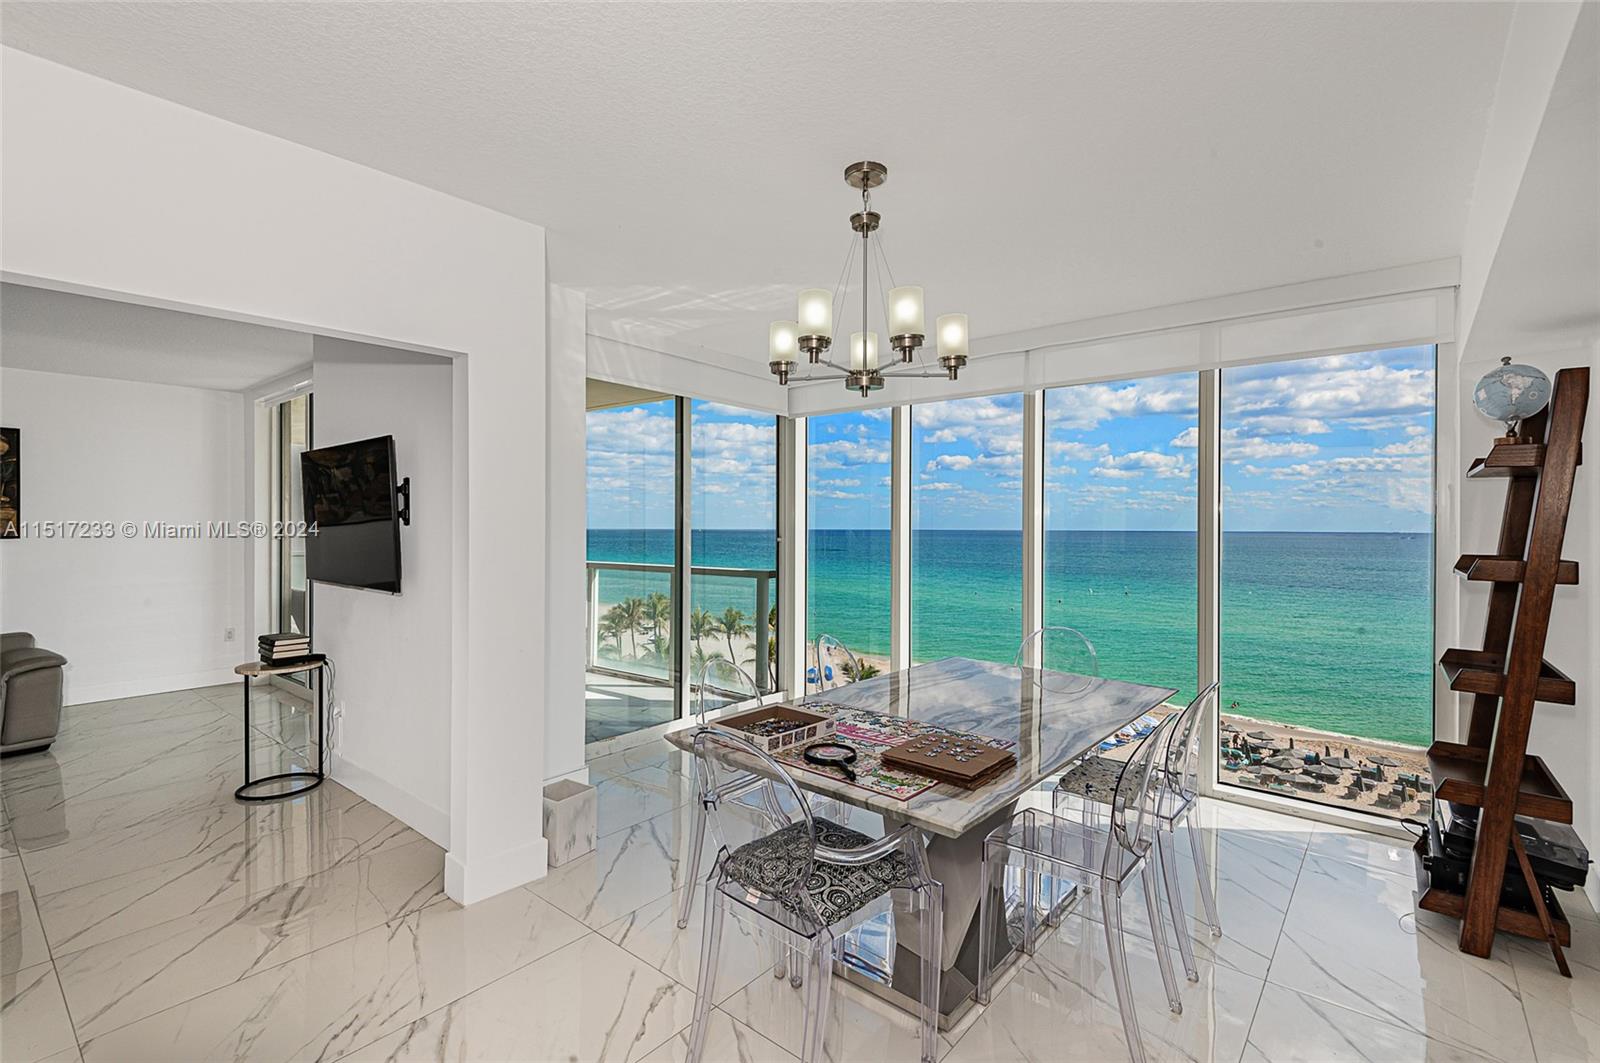 AVAILABLE as of April. Direct upgraded Oceanfront condo with stunning east exposure. Fully furnished with 2 beds & 2.5 baths is waiting for you to enjoy short or long term. Azure views from dining, living areas & master bedroom. Electric shades, washer/dryer are only a few upgrades. This full-service building with valet, 24/7 security & lobby attendant also offers beach & pool service with launch chairs, umbrellas, beach towels + gym. Just a few steps away from major roads, shopping and restaurants, including shopping Malls of Aventura, Bal Harbor & Gulfstream Casino. Please refer to Broker's Remarks.